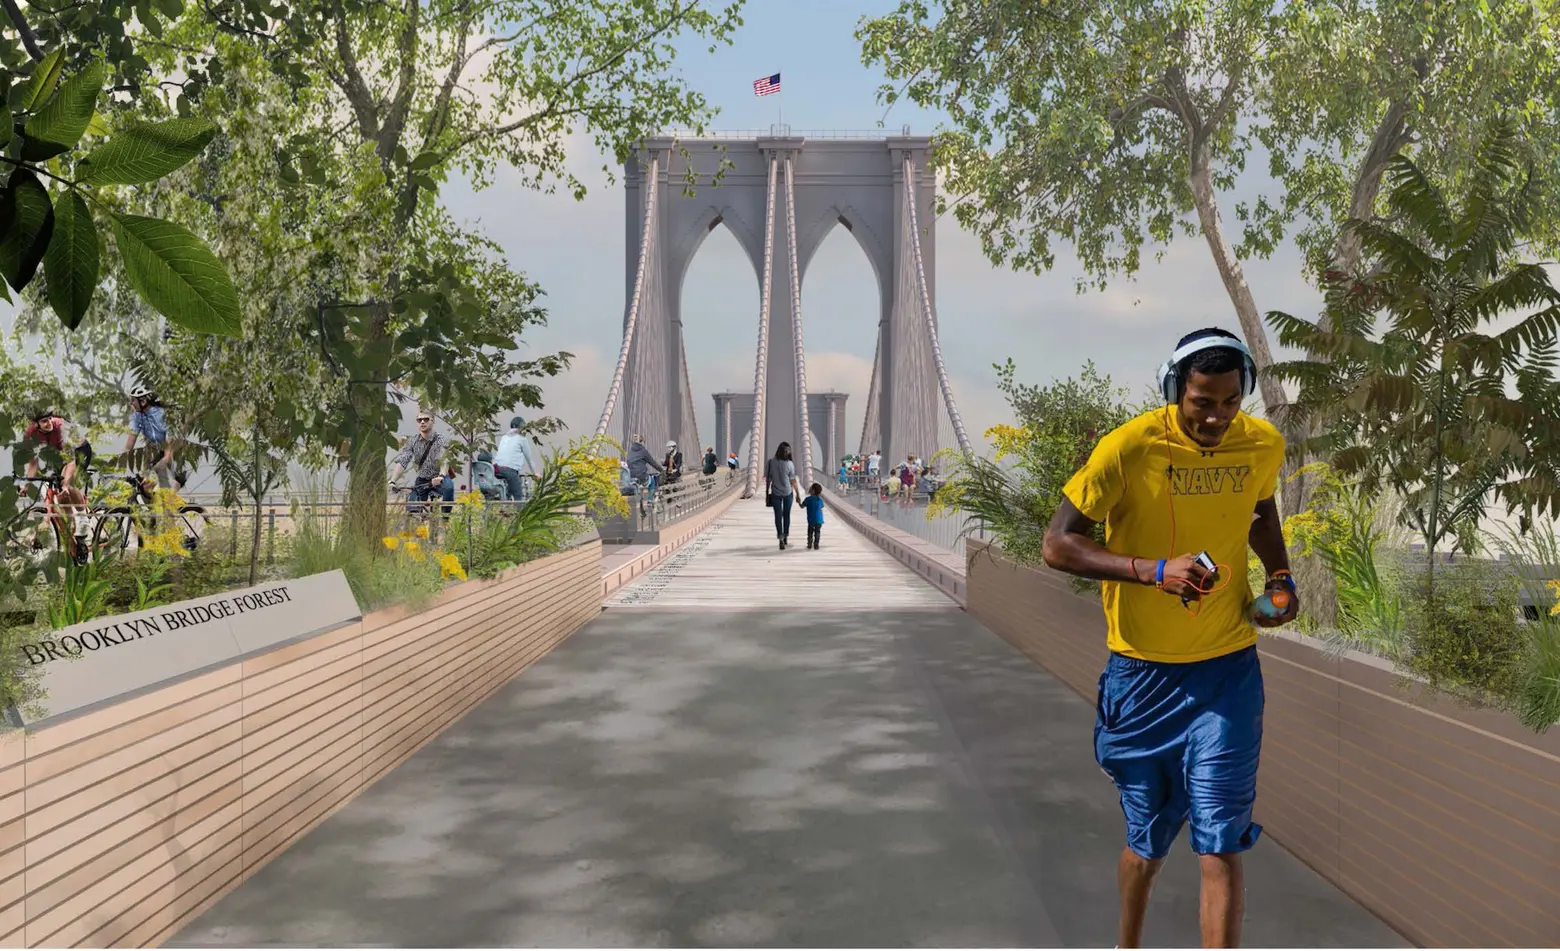 Winning design proposal brings better mobility and biodiverse ‘microforests’ to the Brooklyn Bridge